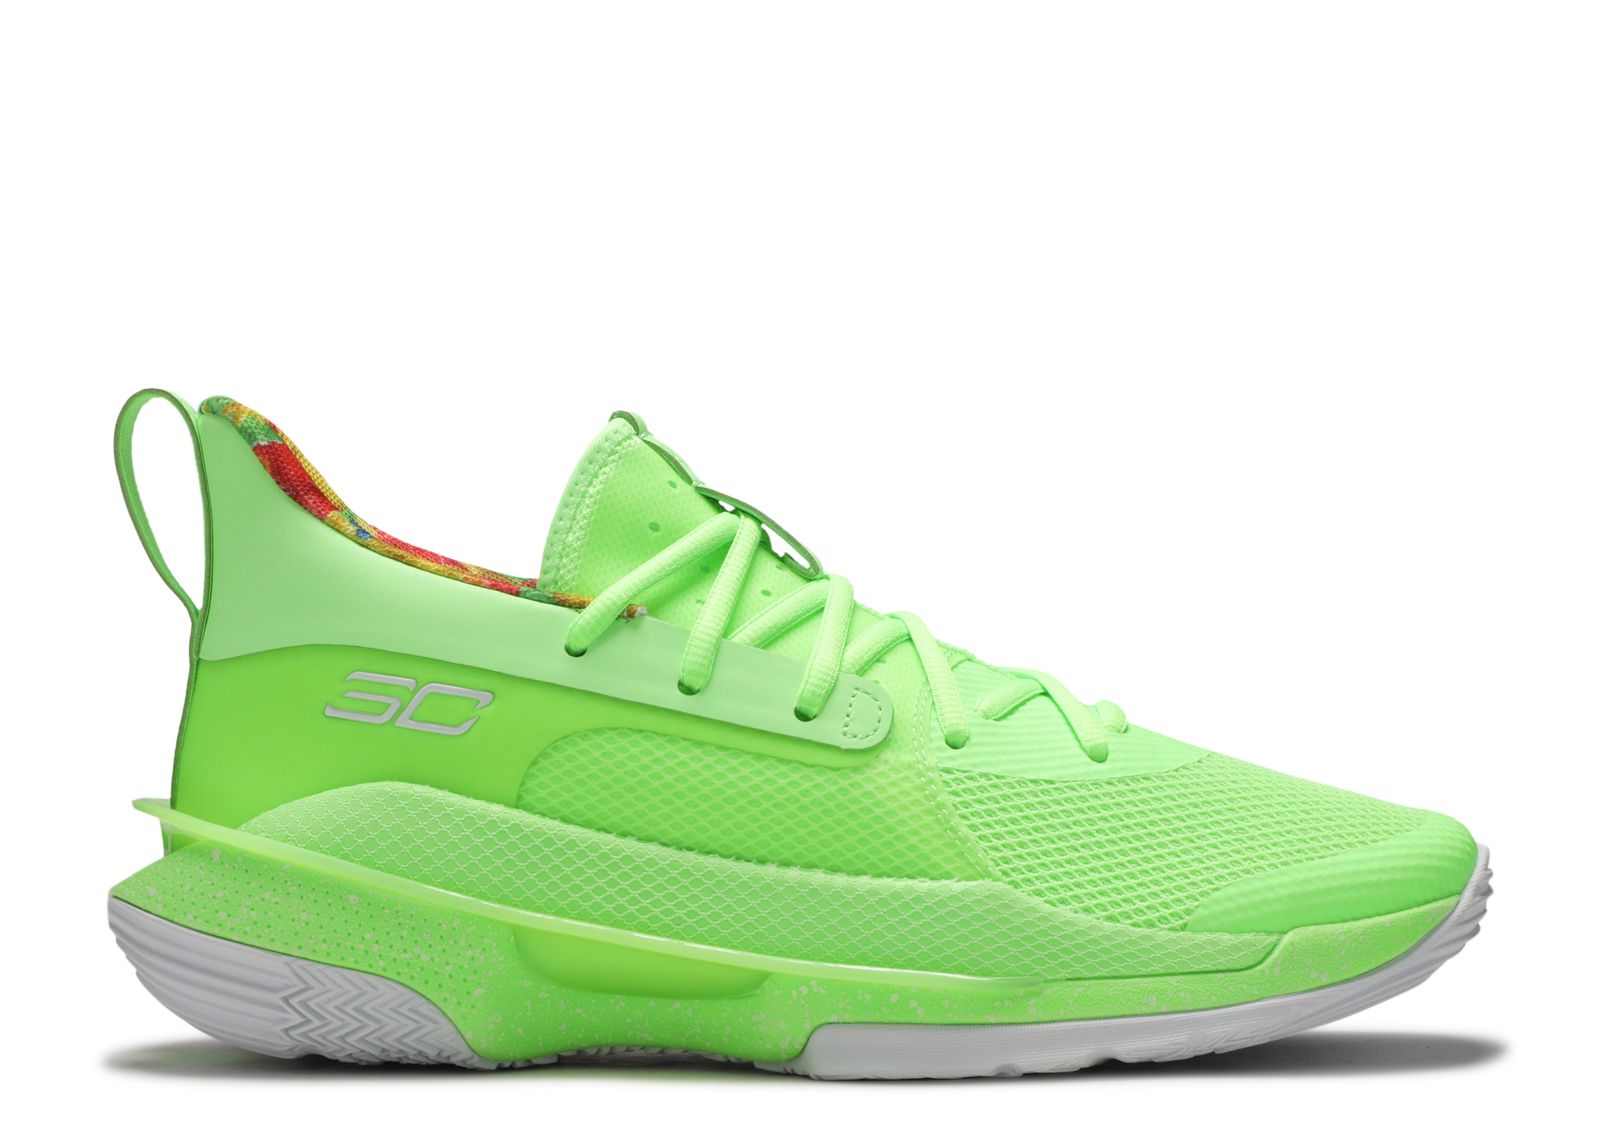 Vegetables capsule drunk Sour Patch Kids X Curry 7 'Lime' - Under Armour - 3021258 302 - phosphor  green/white | Flight Club